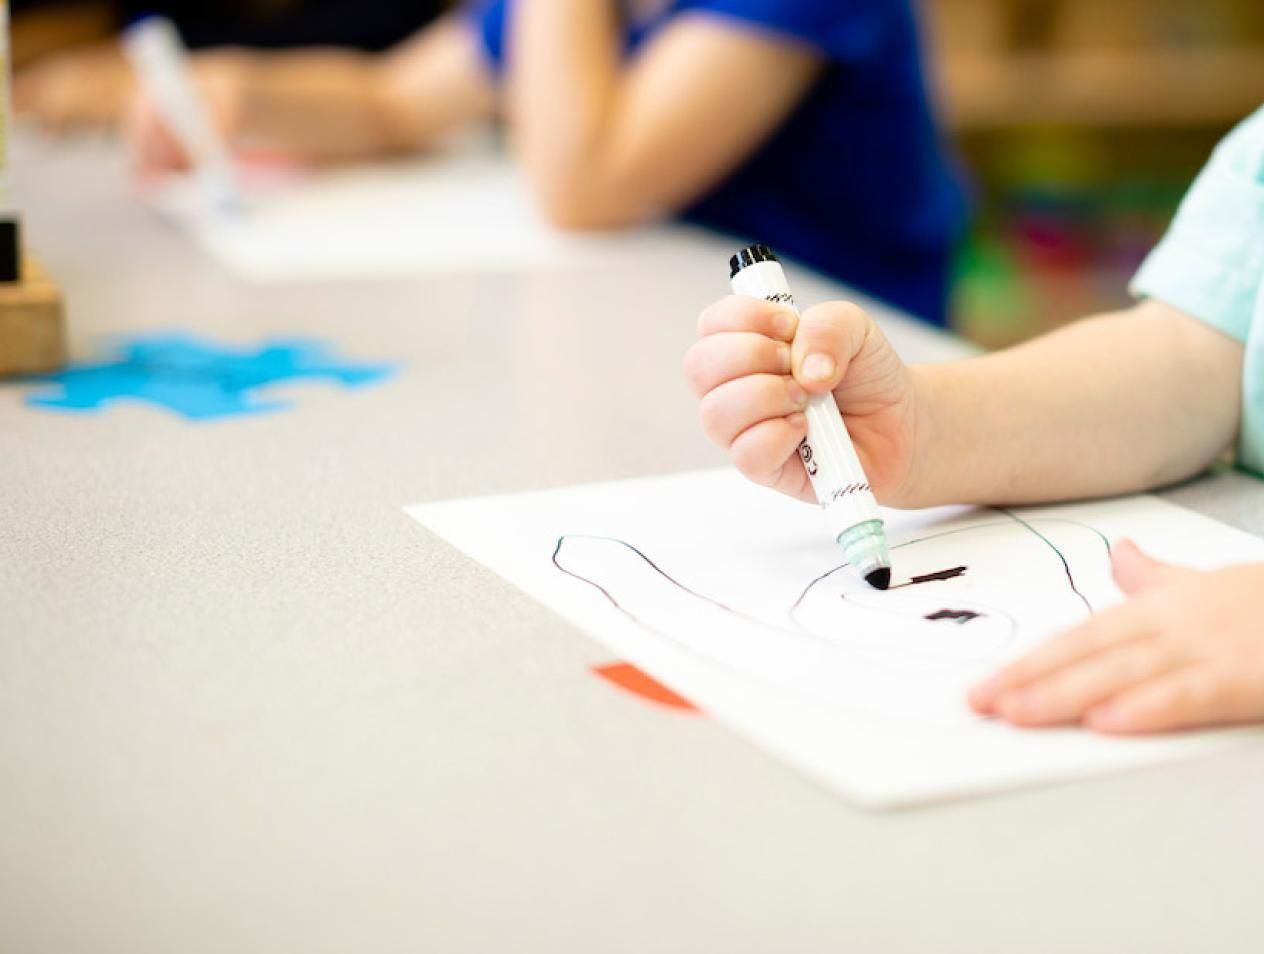 Child using markers in classroom setting.